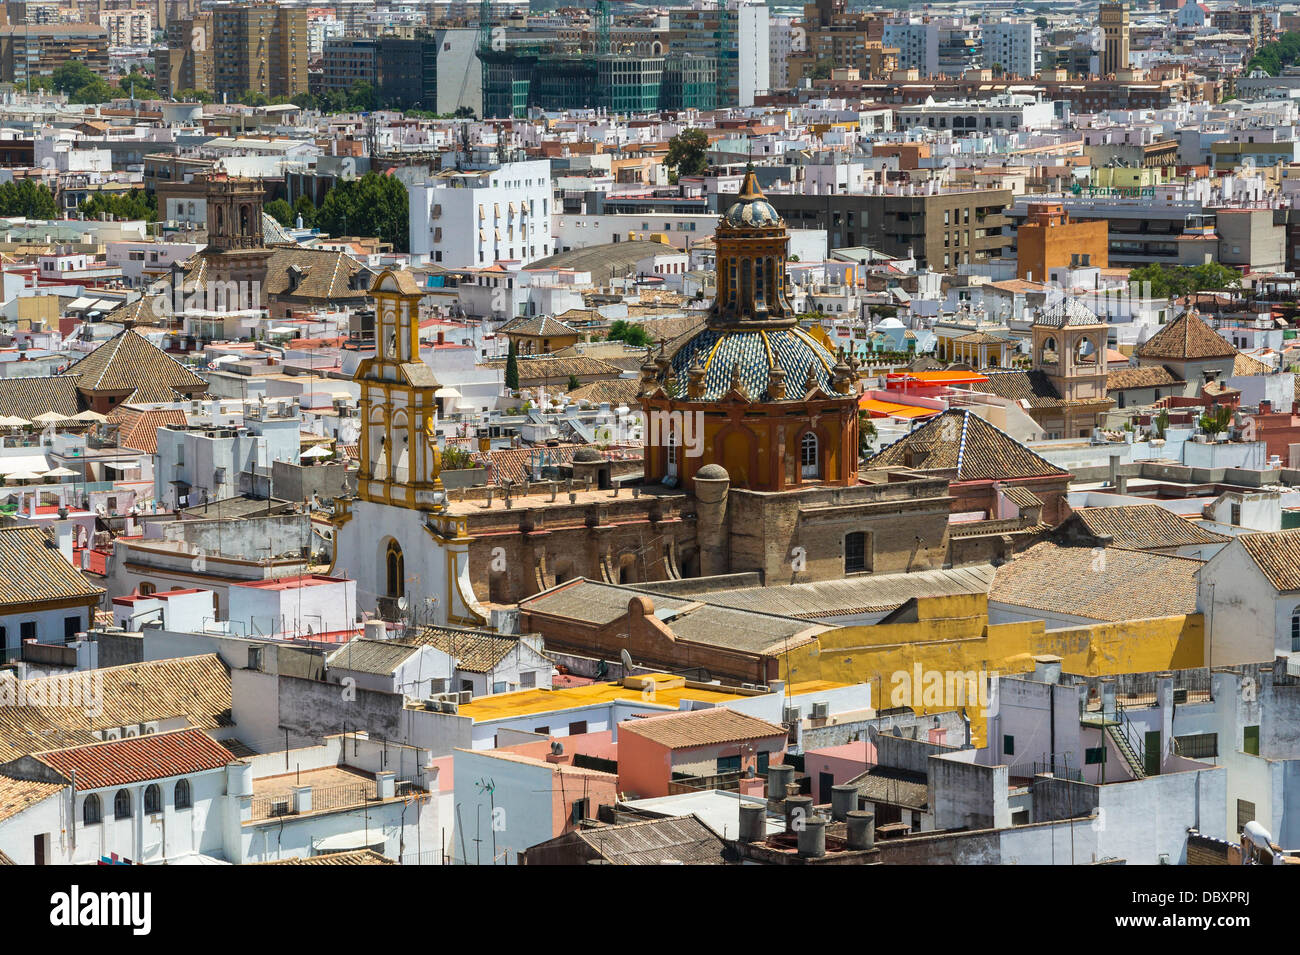 The church 'Santa Cruz' merging from roofs, seen from the 'Giralda, Seville, Spain. Stock Photo